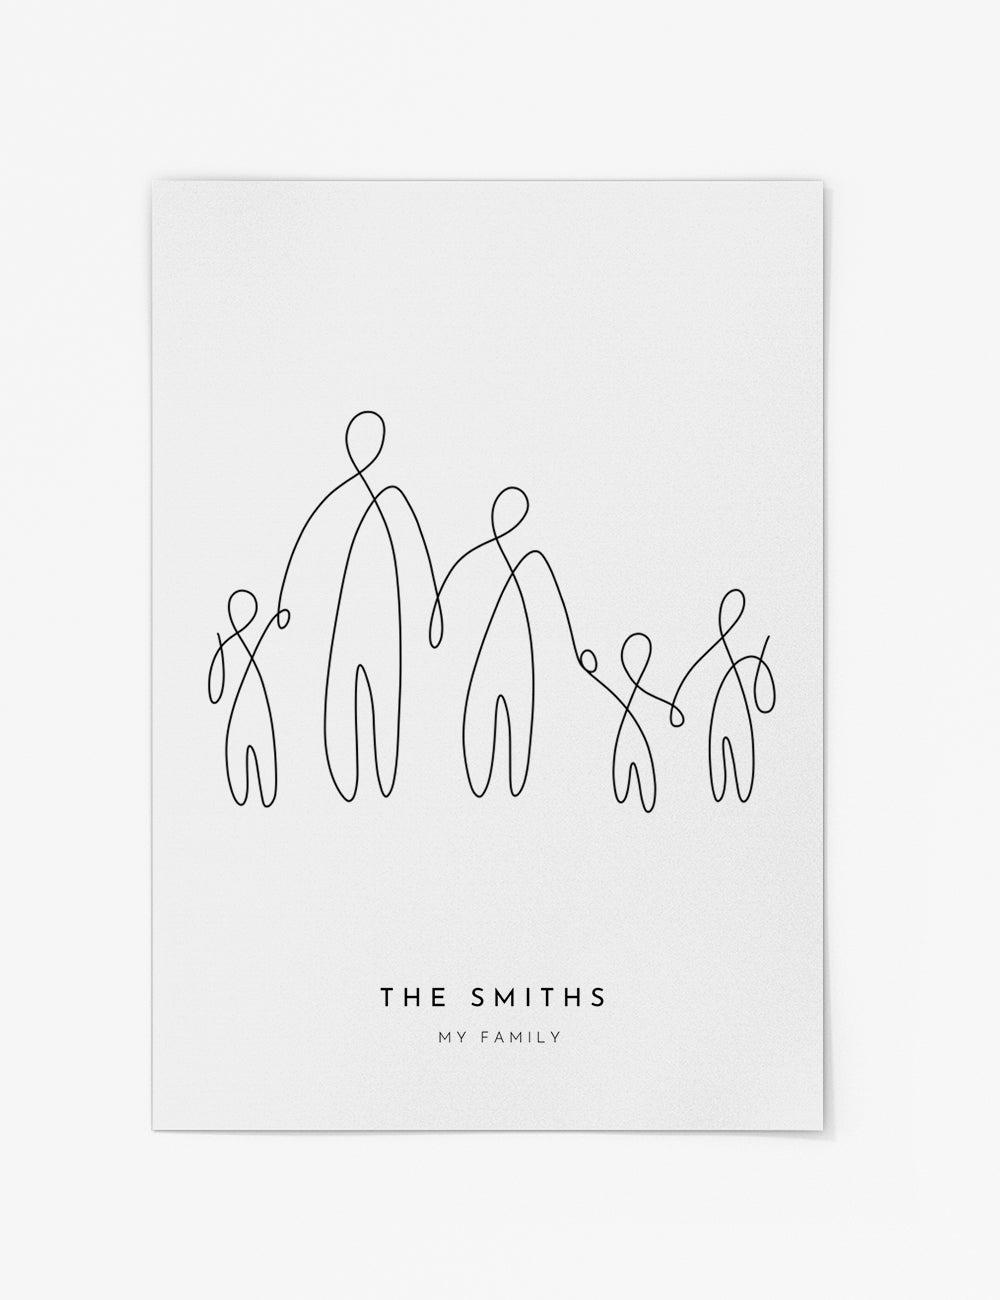 Family of 5 Holding Hands Print